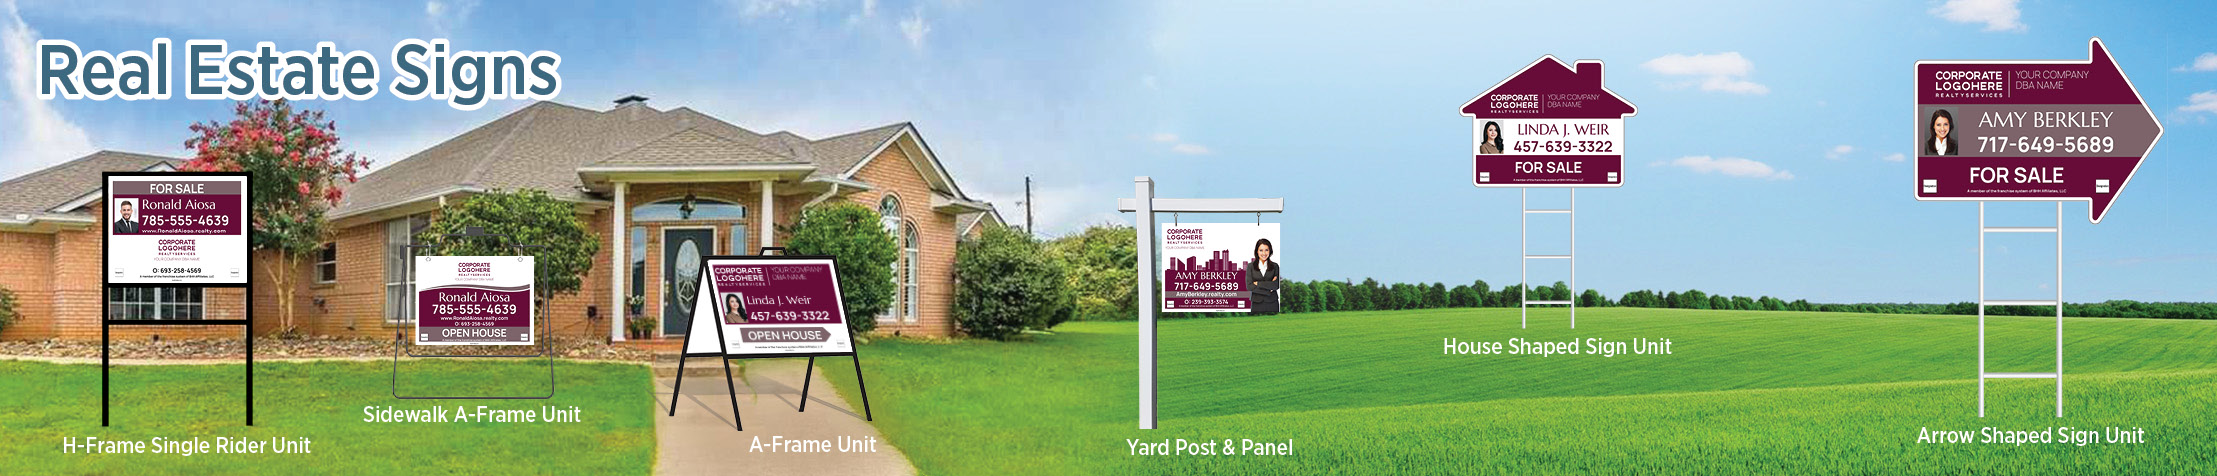 Berkshire Hathaway Real Estate Signs - BHHS approved vendor real estate signs - H-Frame Units, Directional Signs, A-Frame Units, Yard Post and Panel | BestPrintBuy.com